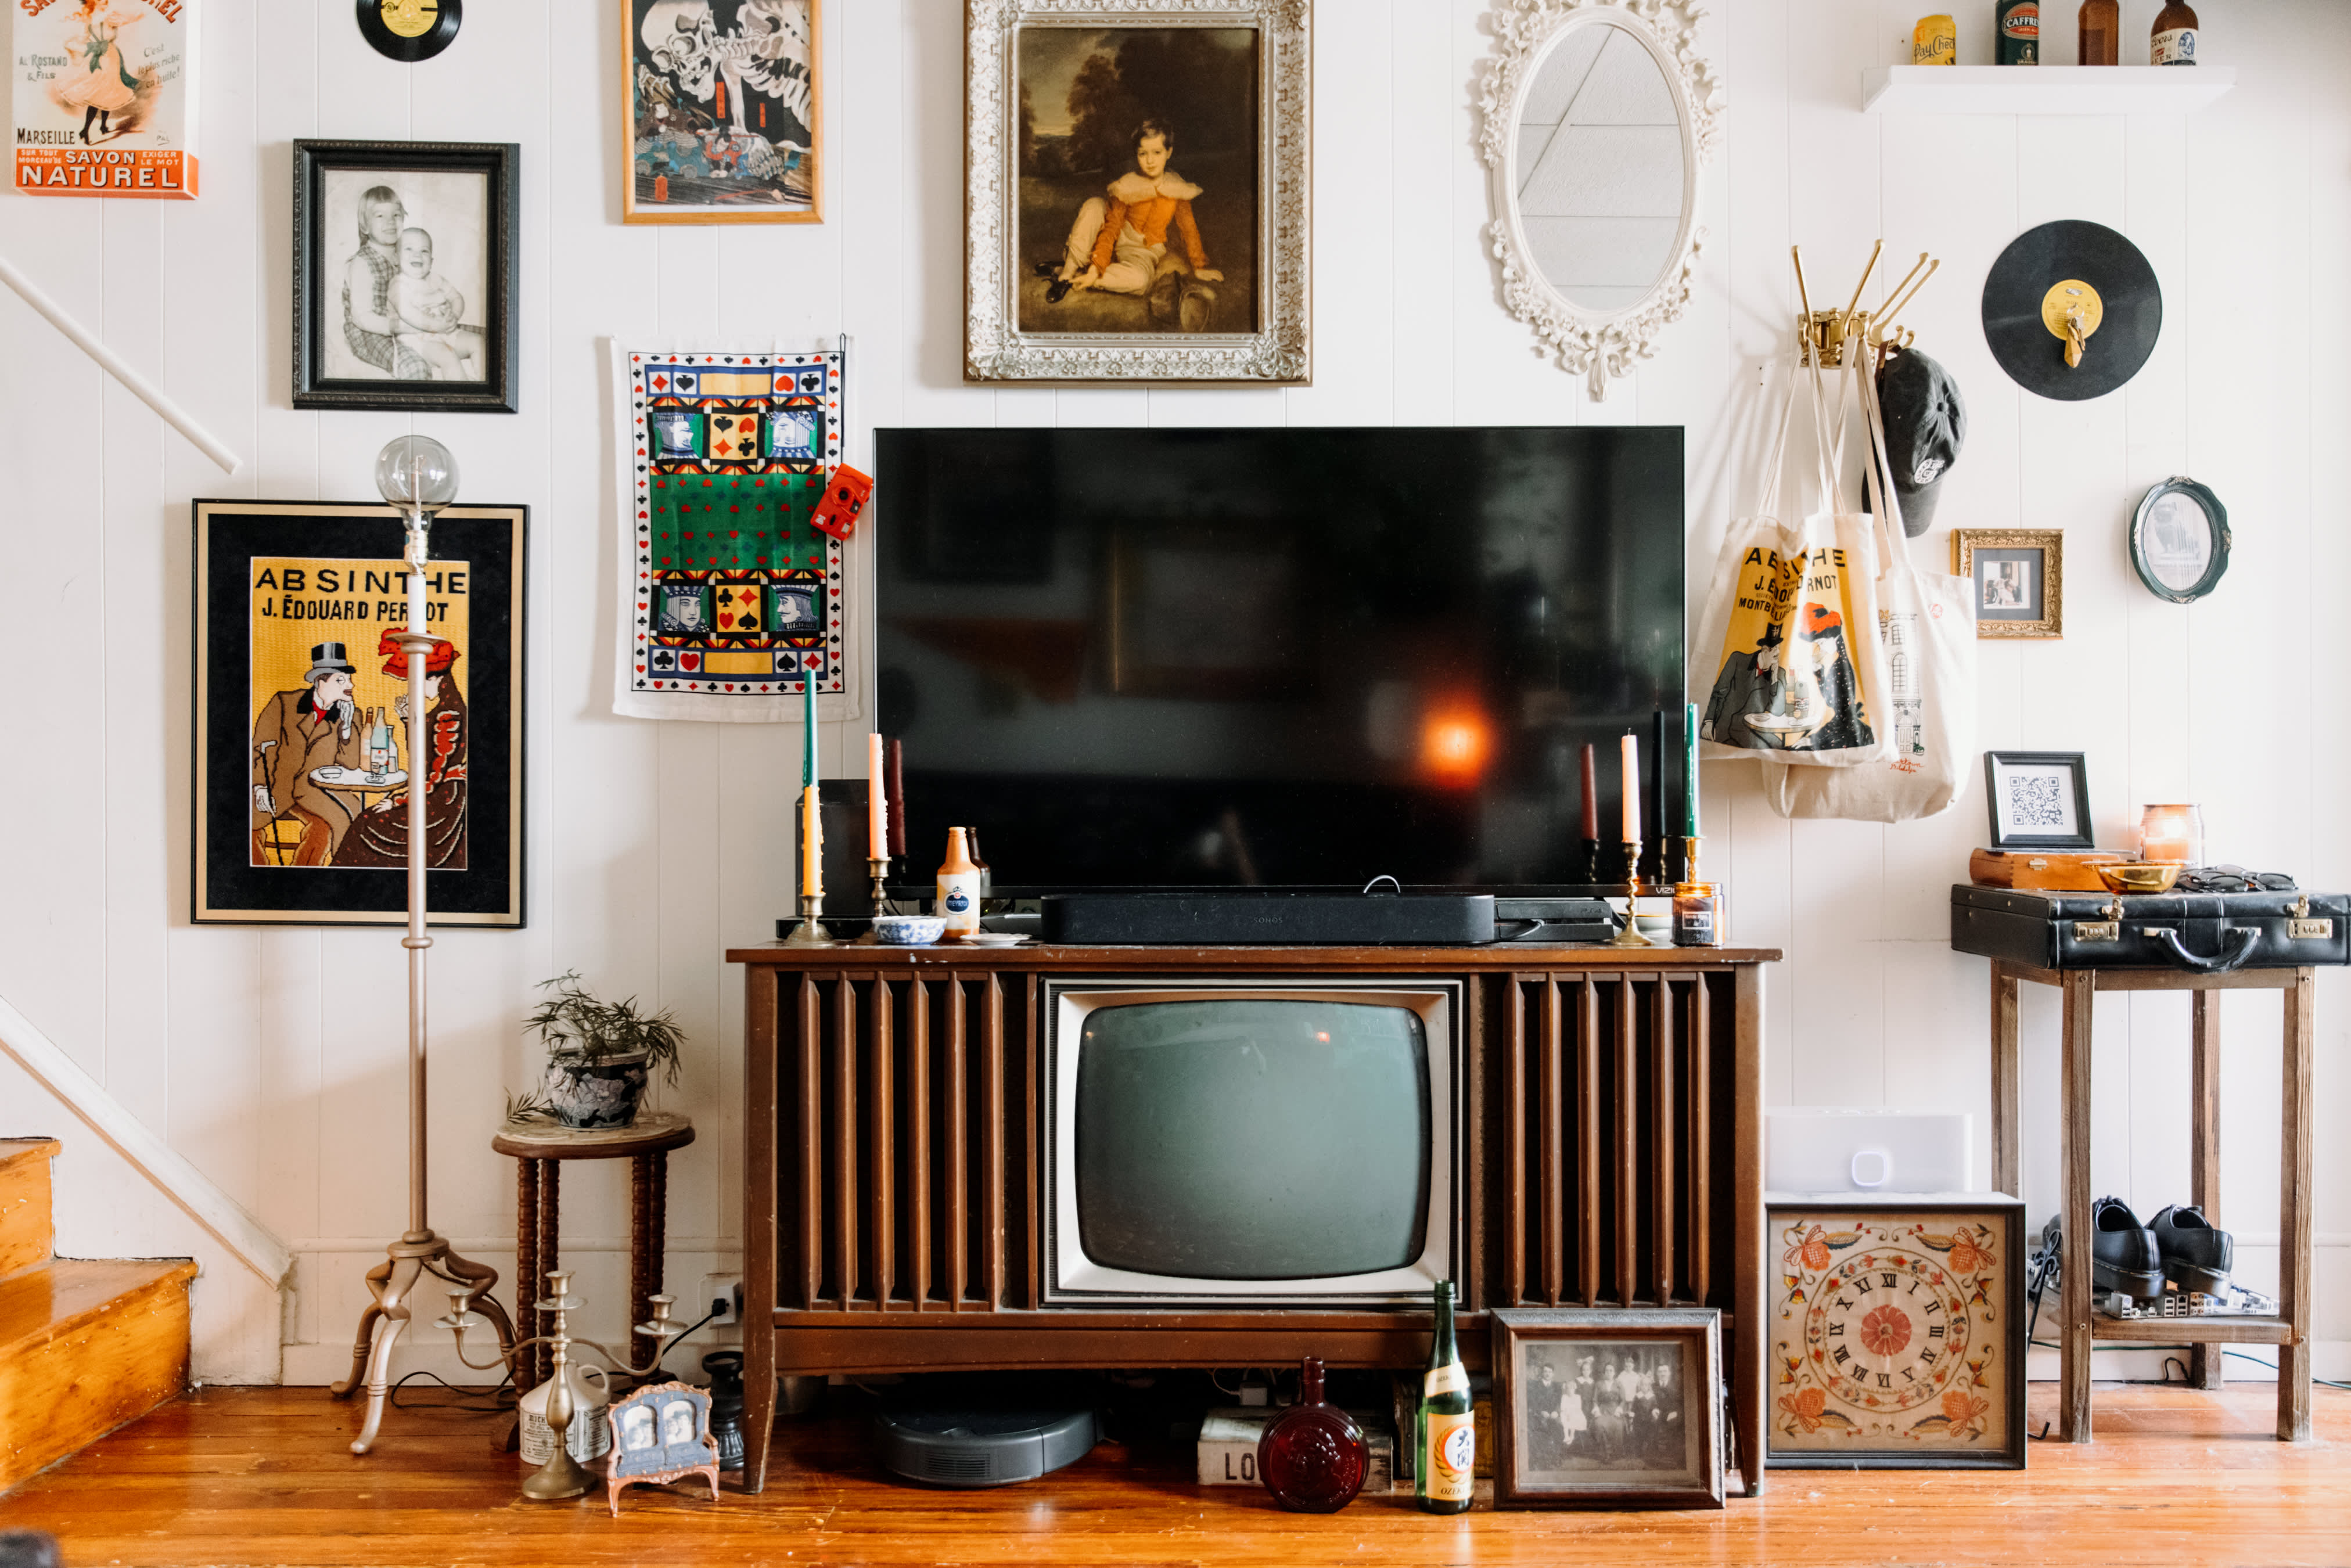 old television set in living room